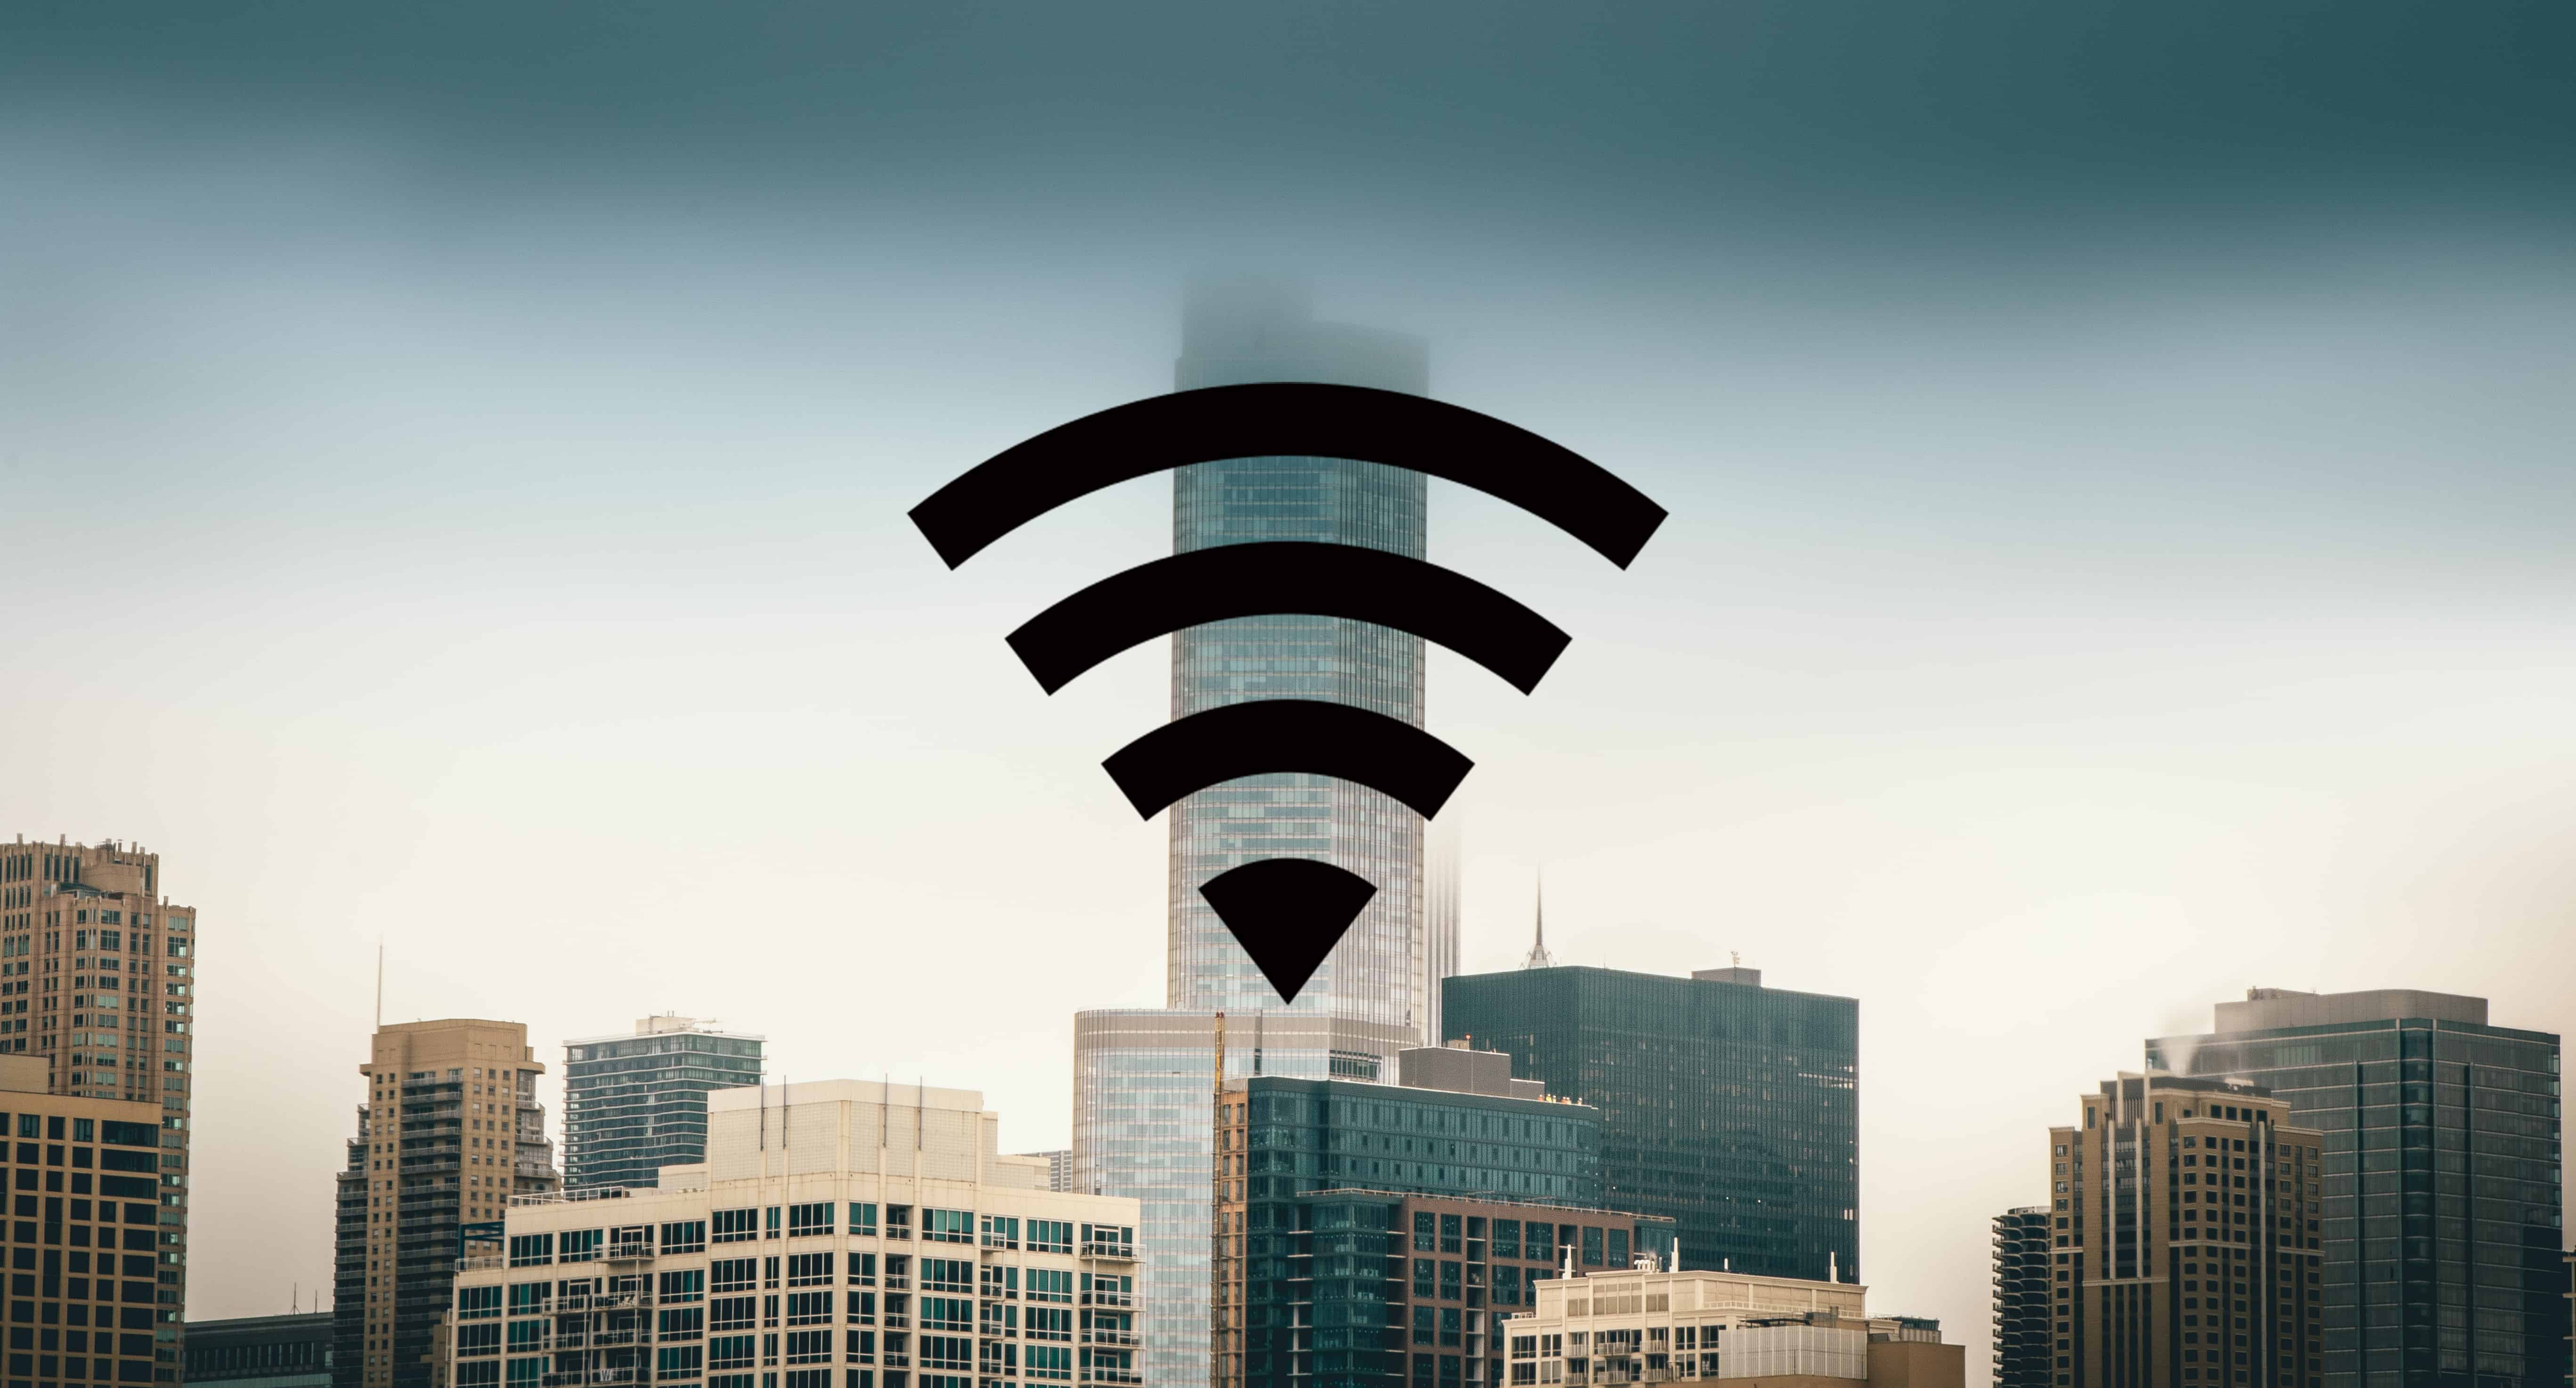 5G Small Cell Deployment: Every Current State Law